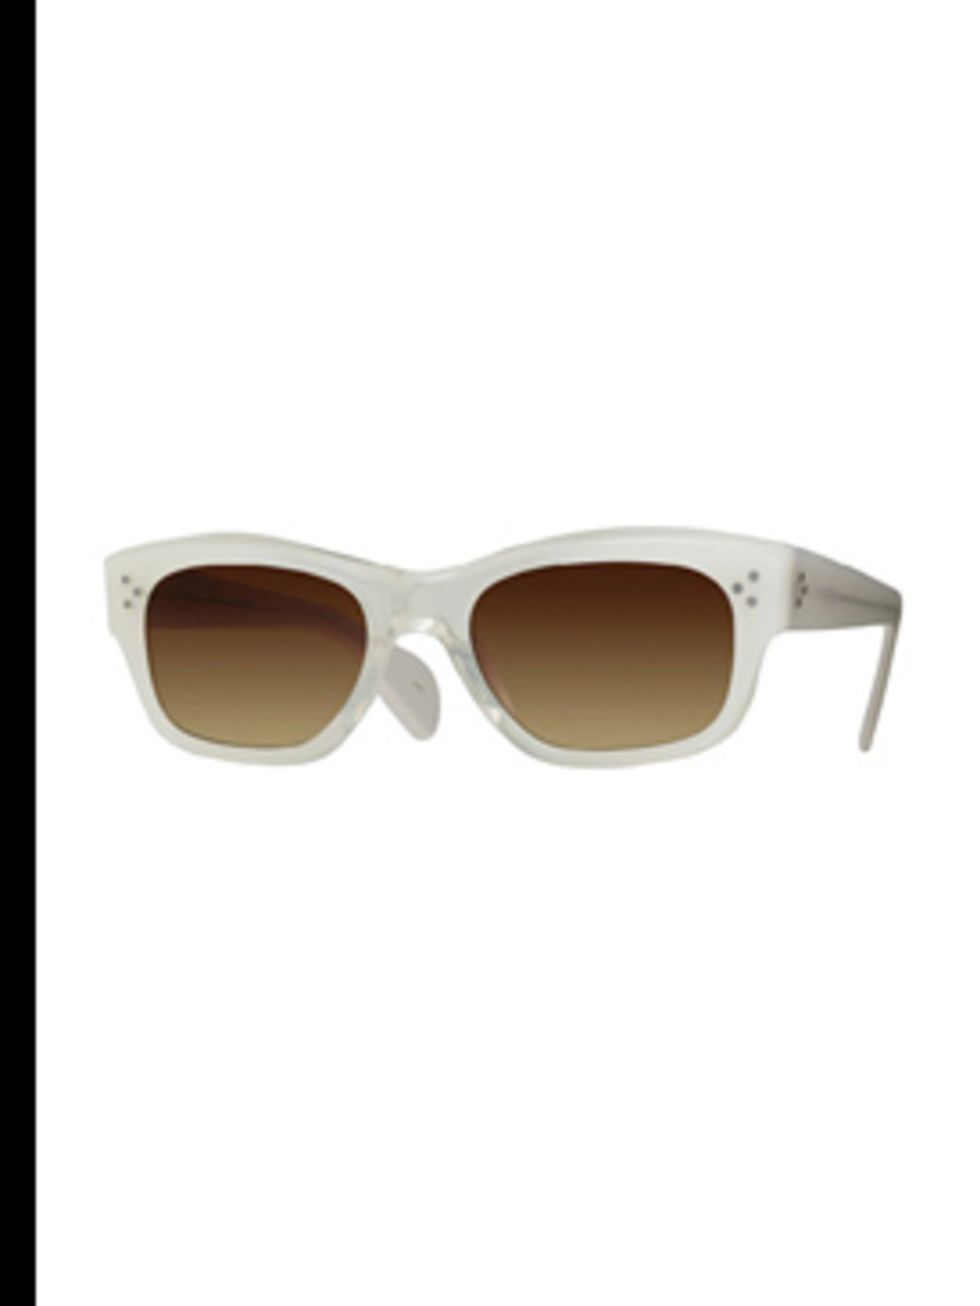 <p>Sunglasses, £150- available on request from David Clulow. For stockists call 0207 486 1485</p>